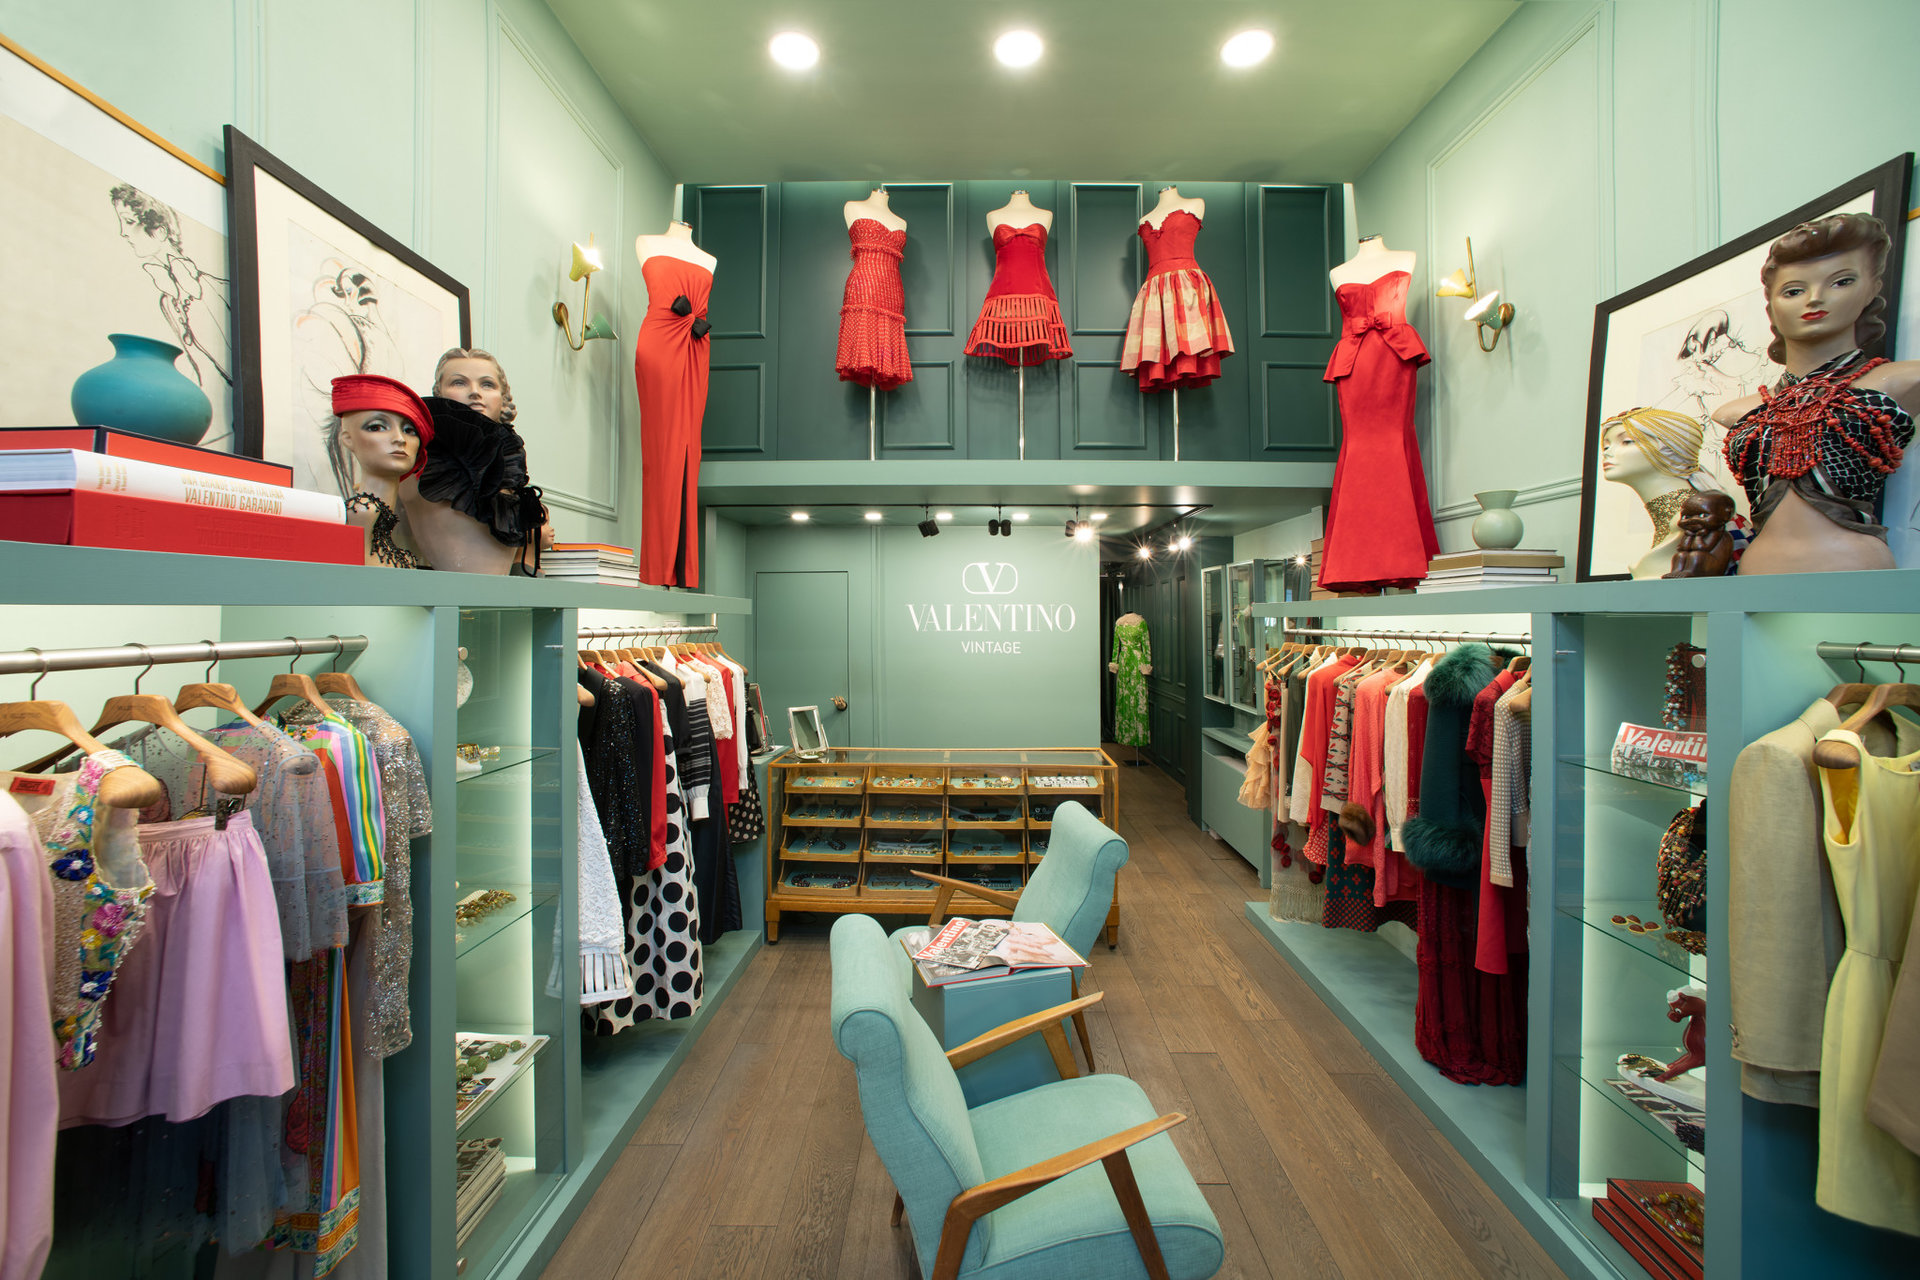 VALENTINO VINTAGE BRINGS SECOND HAND LUXURY PIECES TO VINTAGE SHOPS AROUND  THE WORLD - Mission